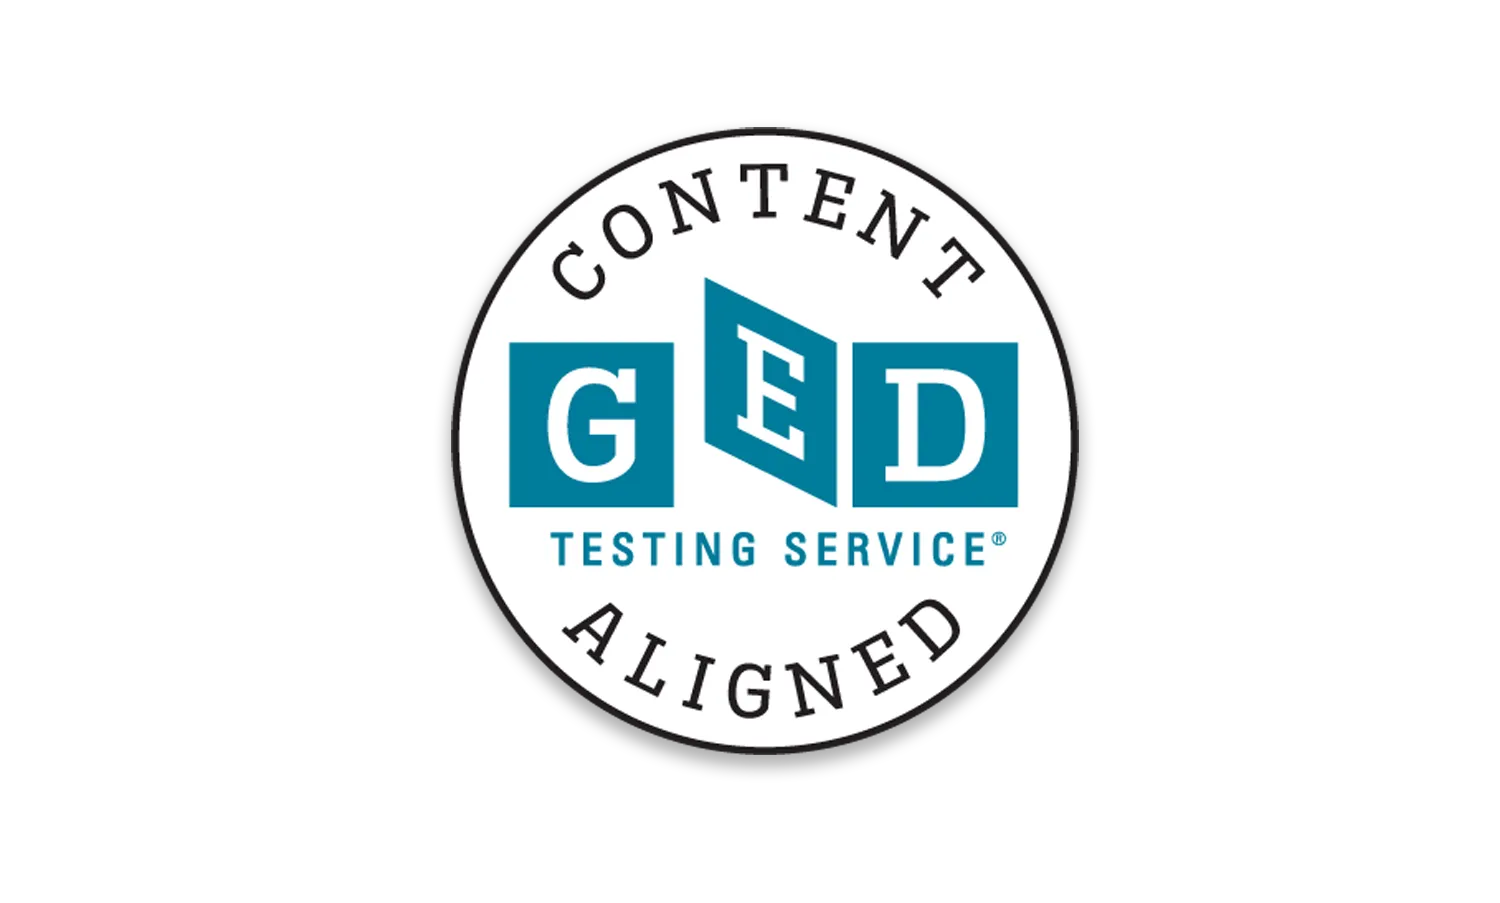 100% ALIGNED TO THE GED® TEST